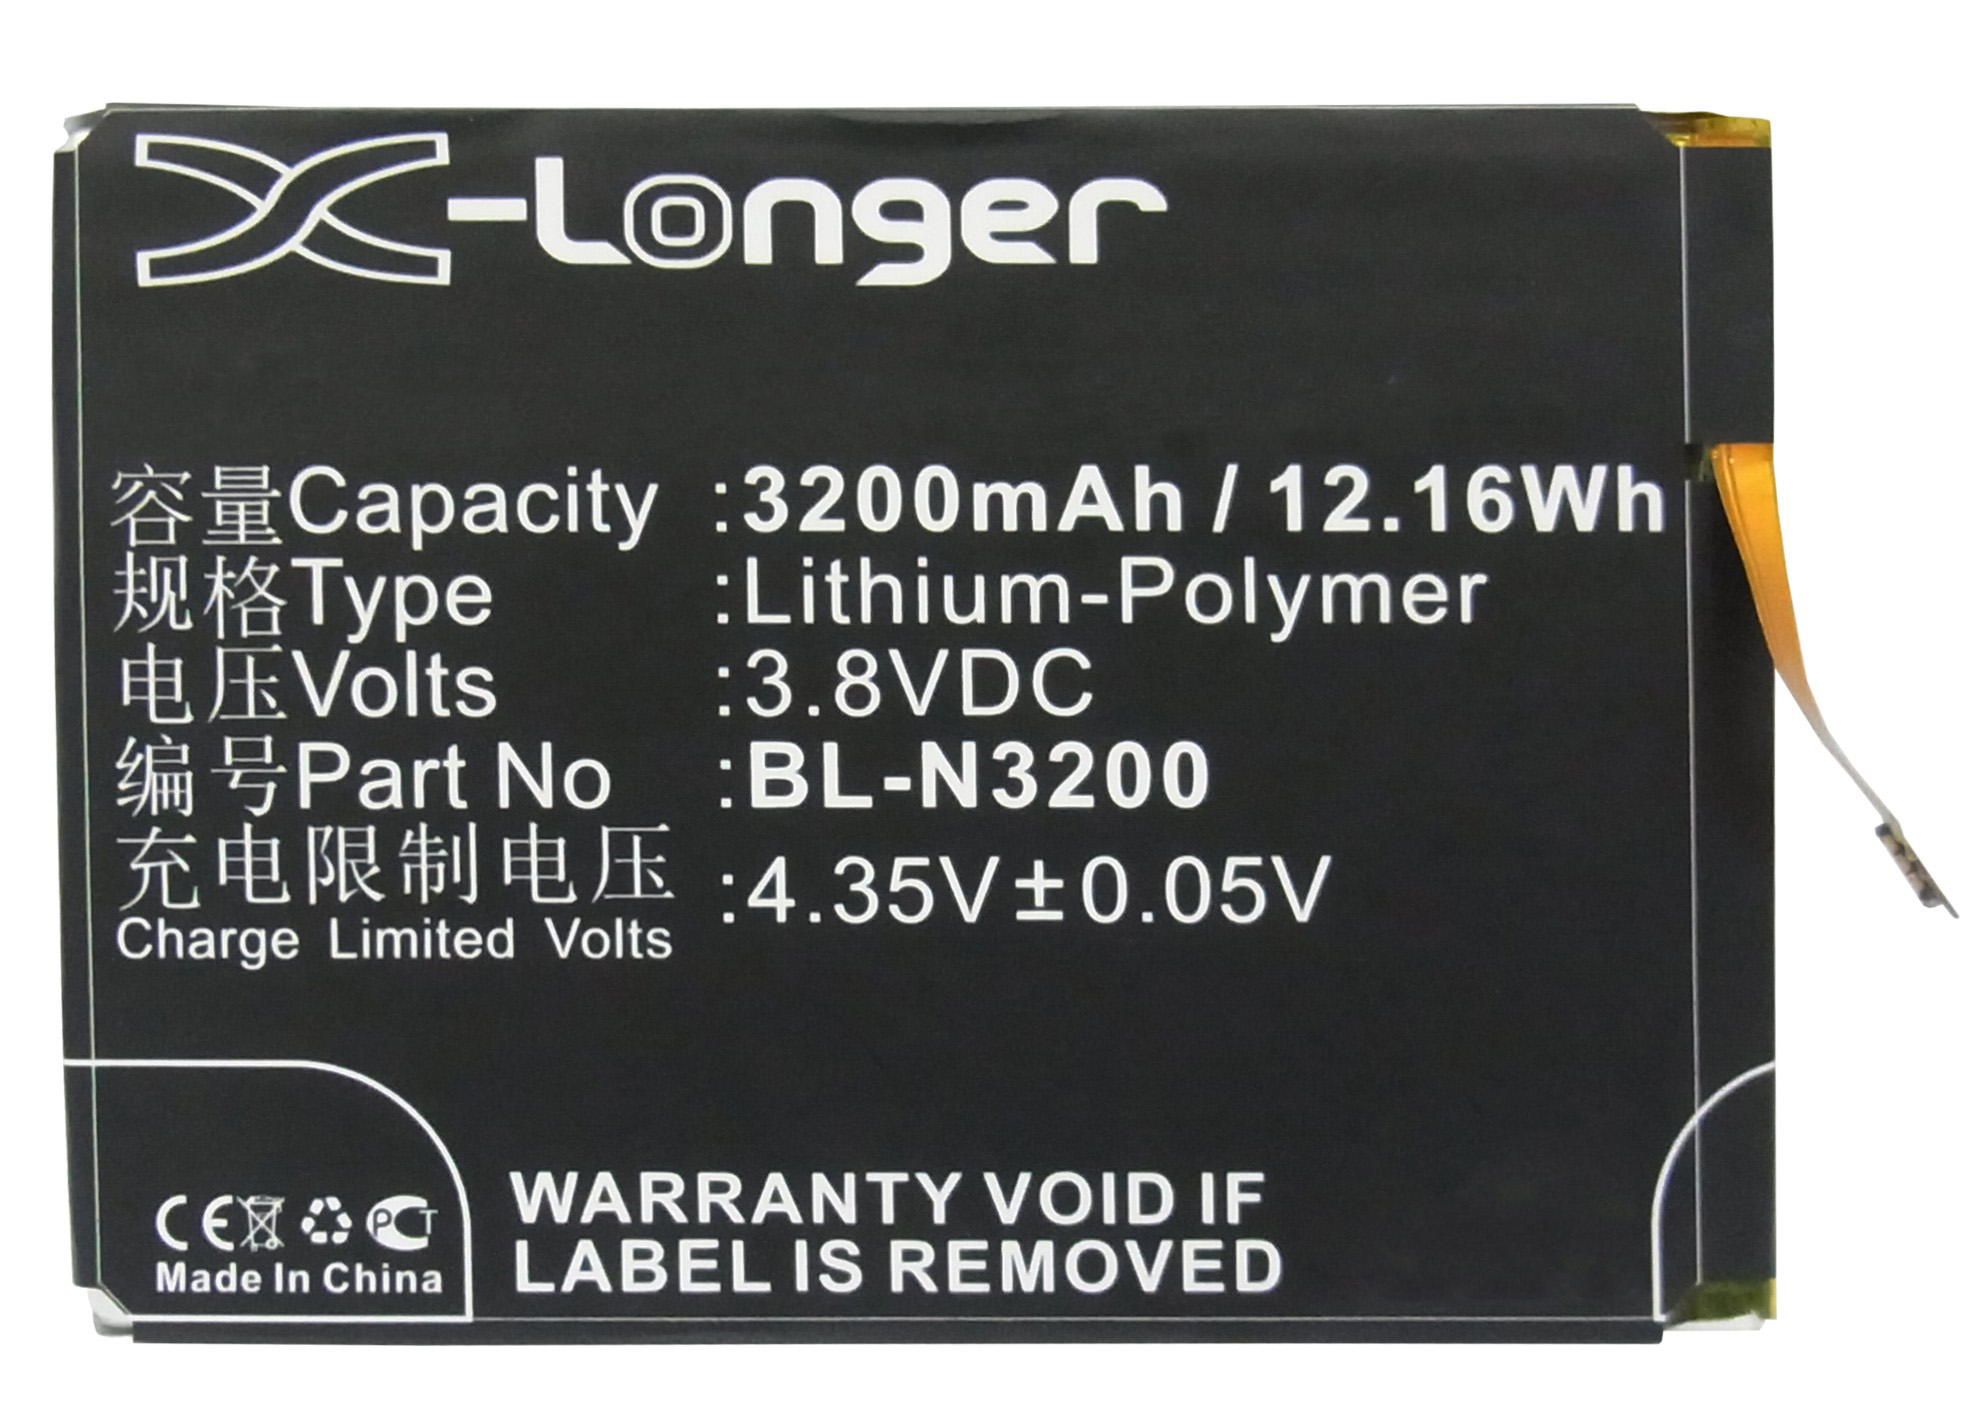 Synergy Digital Battery Compatible With GIONEE BL-N3200 Cellphone Battery - (Li-Pol, 3.8V, 3200 mAh / 12.16Wh)